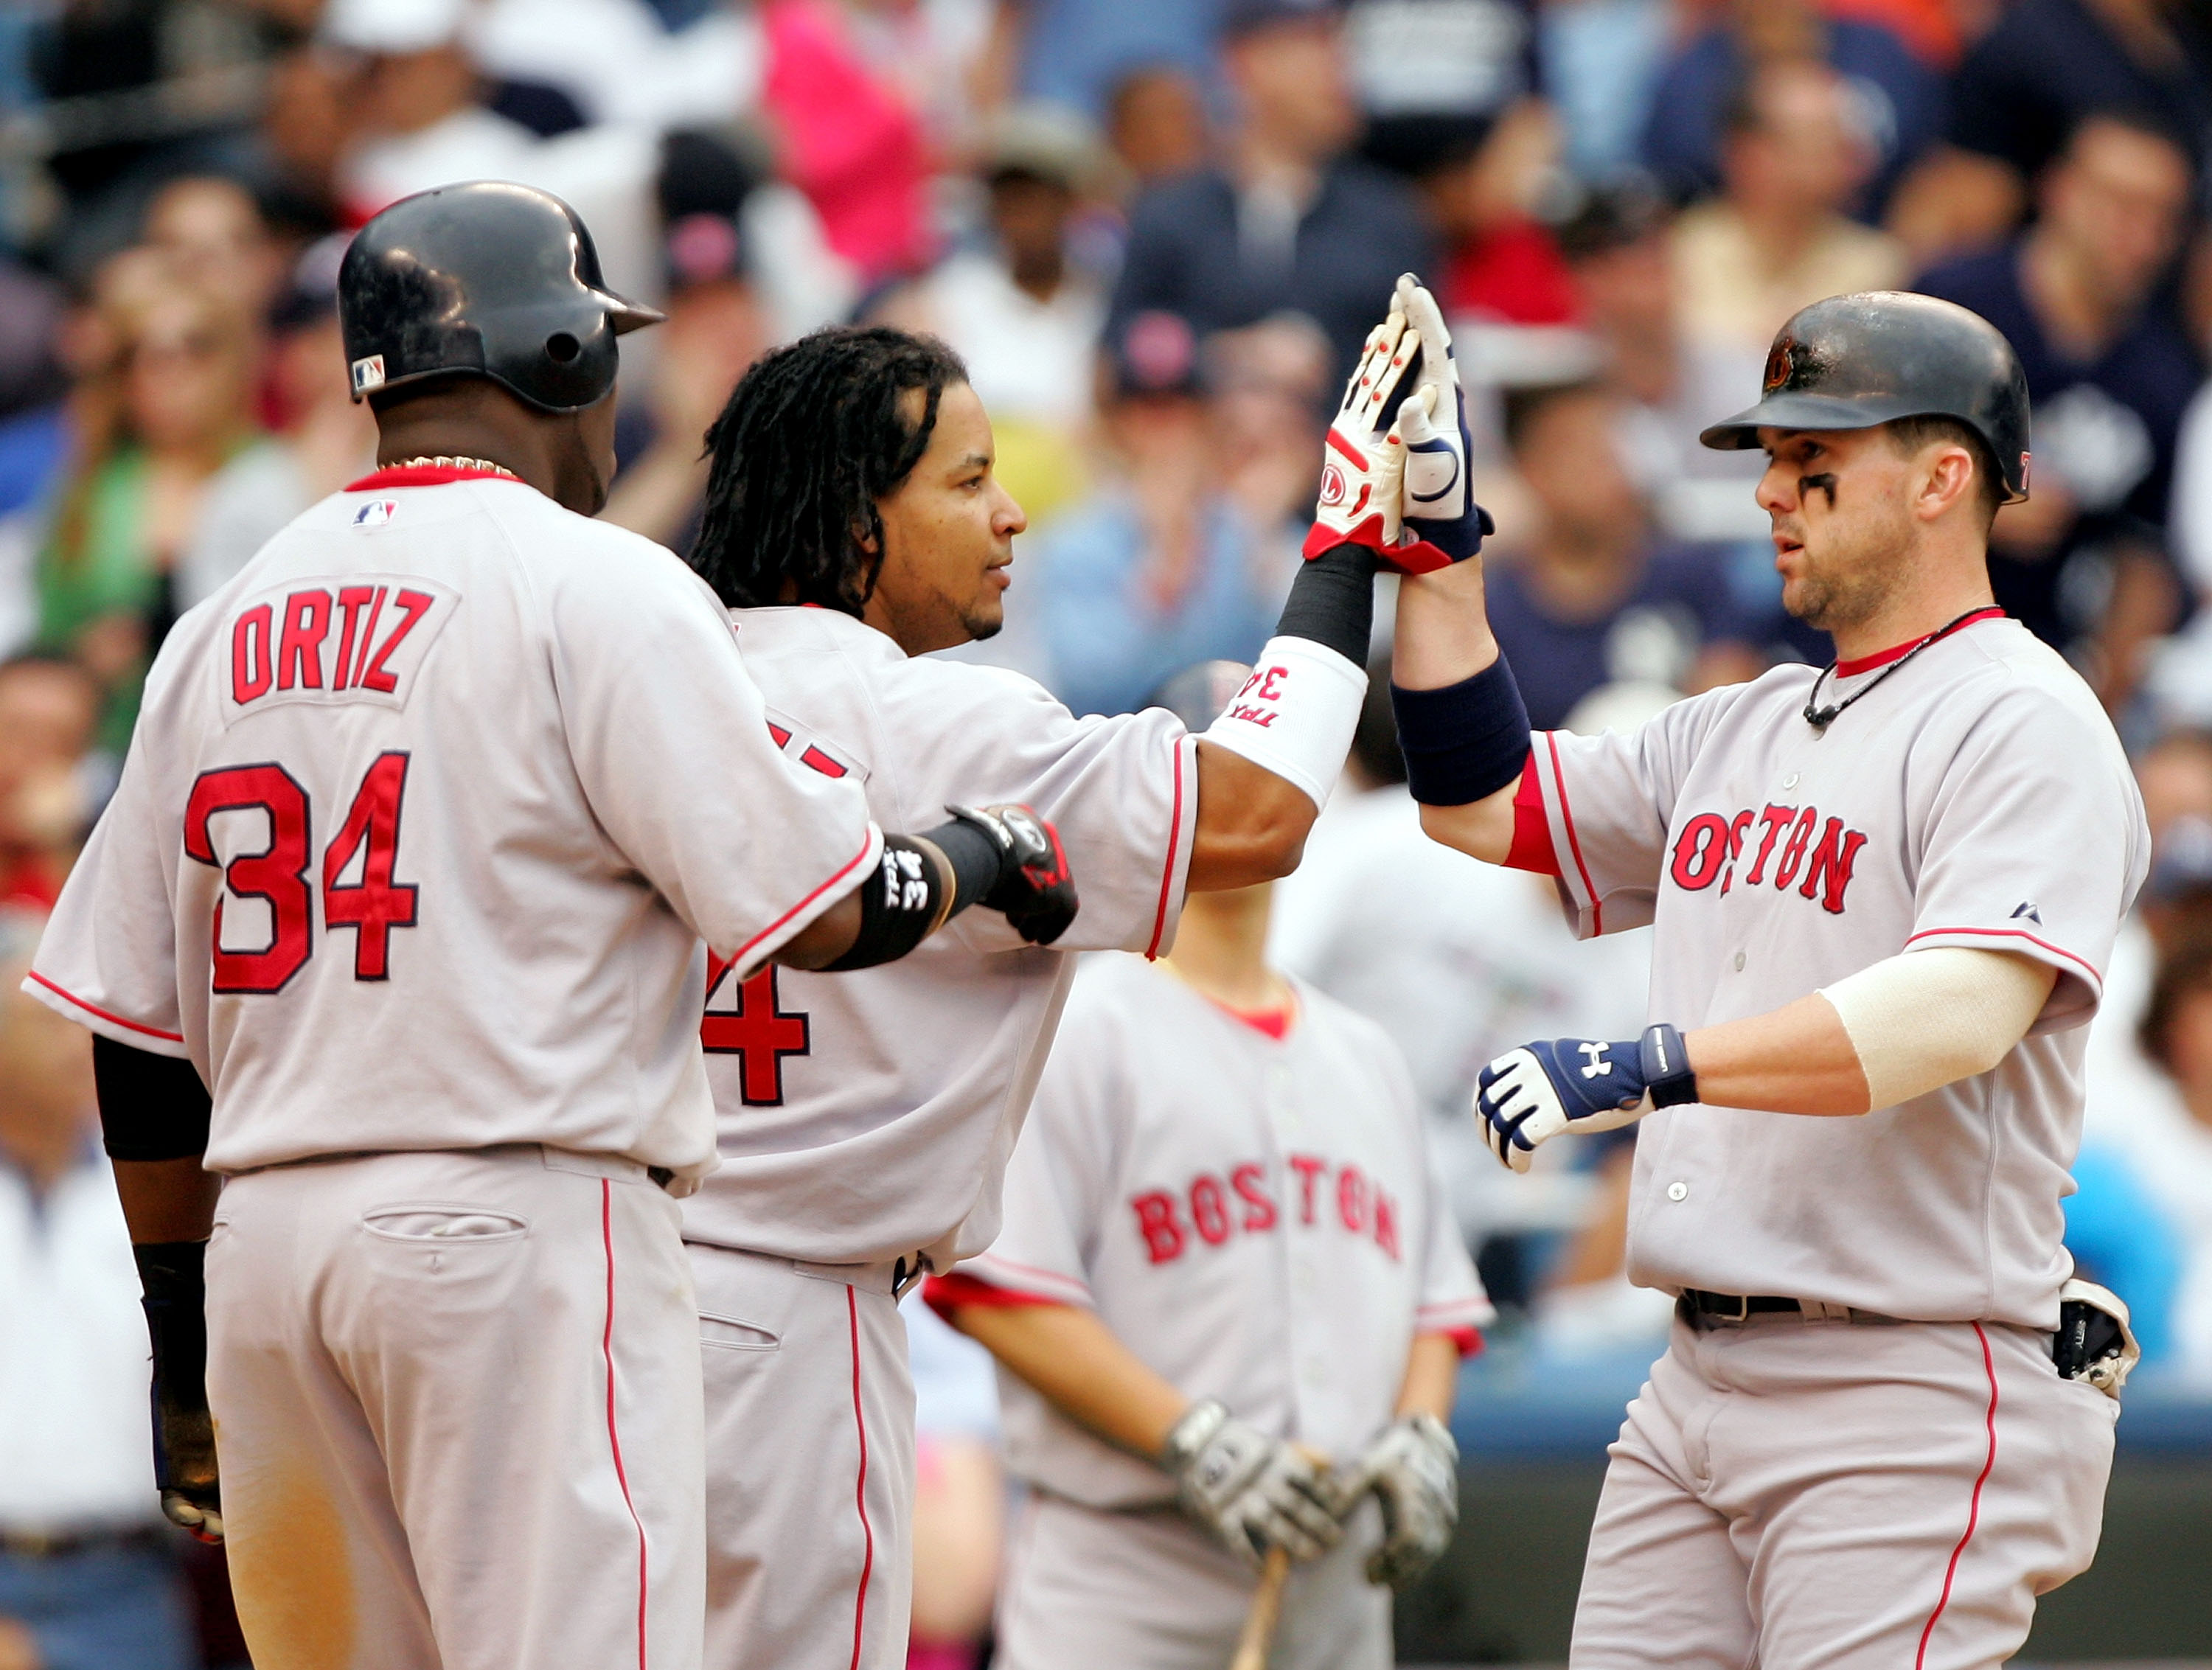 Red Sox pound Yankees 19-3, biggest win in rivalry's history